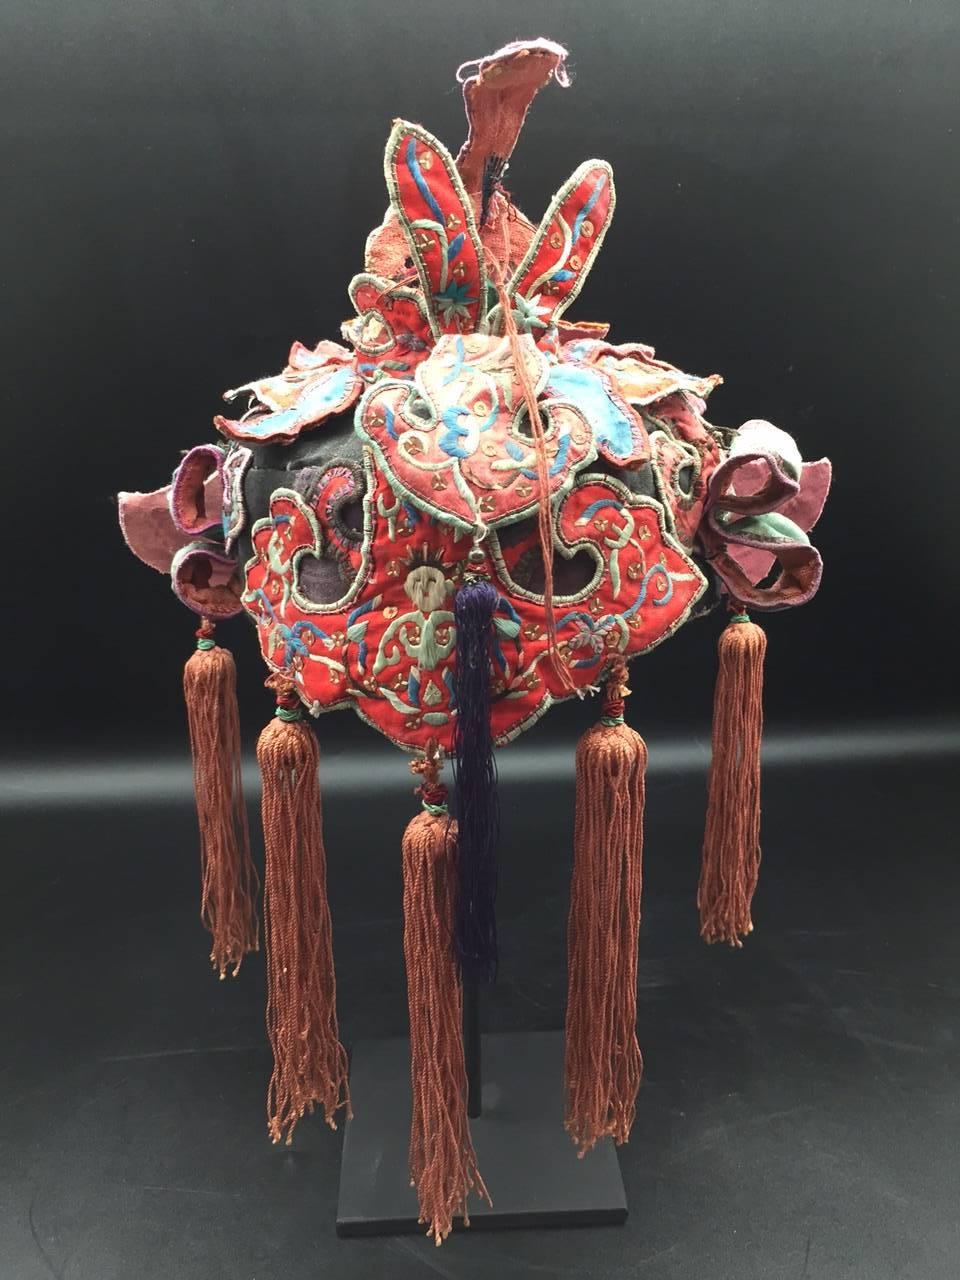 Hand embroidered silk Miao Minority tribe child's headdress with sequins and tassels from the early 20th century on a custom black painted metal mount.